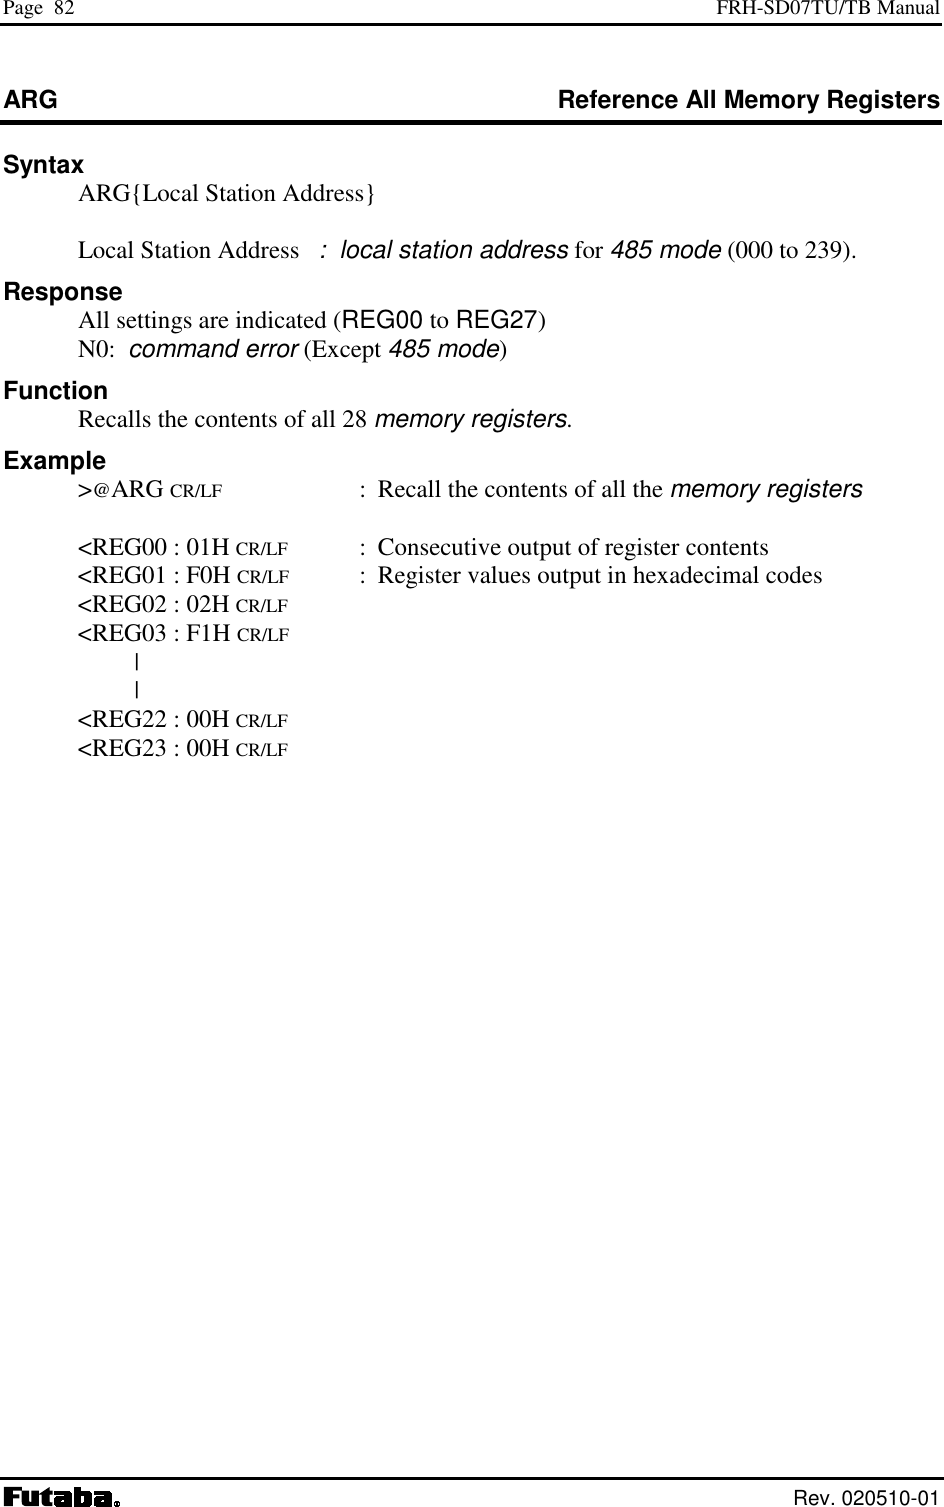 Page  82  FRH-SD07TU/TB Manual  Rev. 020510-01 ARG  Reference All Memory Registers Syntax   ARG{Local Station Address}      Local Station Address   :  local station address for 485 mode (000 to 239). Response   All settings are indicated (REG00 to REG27)  N0:  command error (Except 485 mode) Function   Recalls the contents of all 28 memory registers. Example  &gt;@ARG CR/LF  :  Recall the contents of all the memory registers    &lt;REG00 : 01H CR/LF  :  Consecutive output of register contents   &lt;REG01 : F0H CR/LF  :  Register values output in hexadecimal codes   &lt;REG02 : 02H CR/LF   &lt;REG03 : F1H CR/LF  |  |   &lt;REG22 : 00H CR/LF   &lt;REG23 : 00H CR/LF 